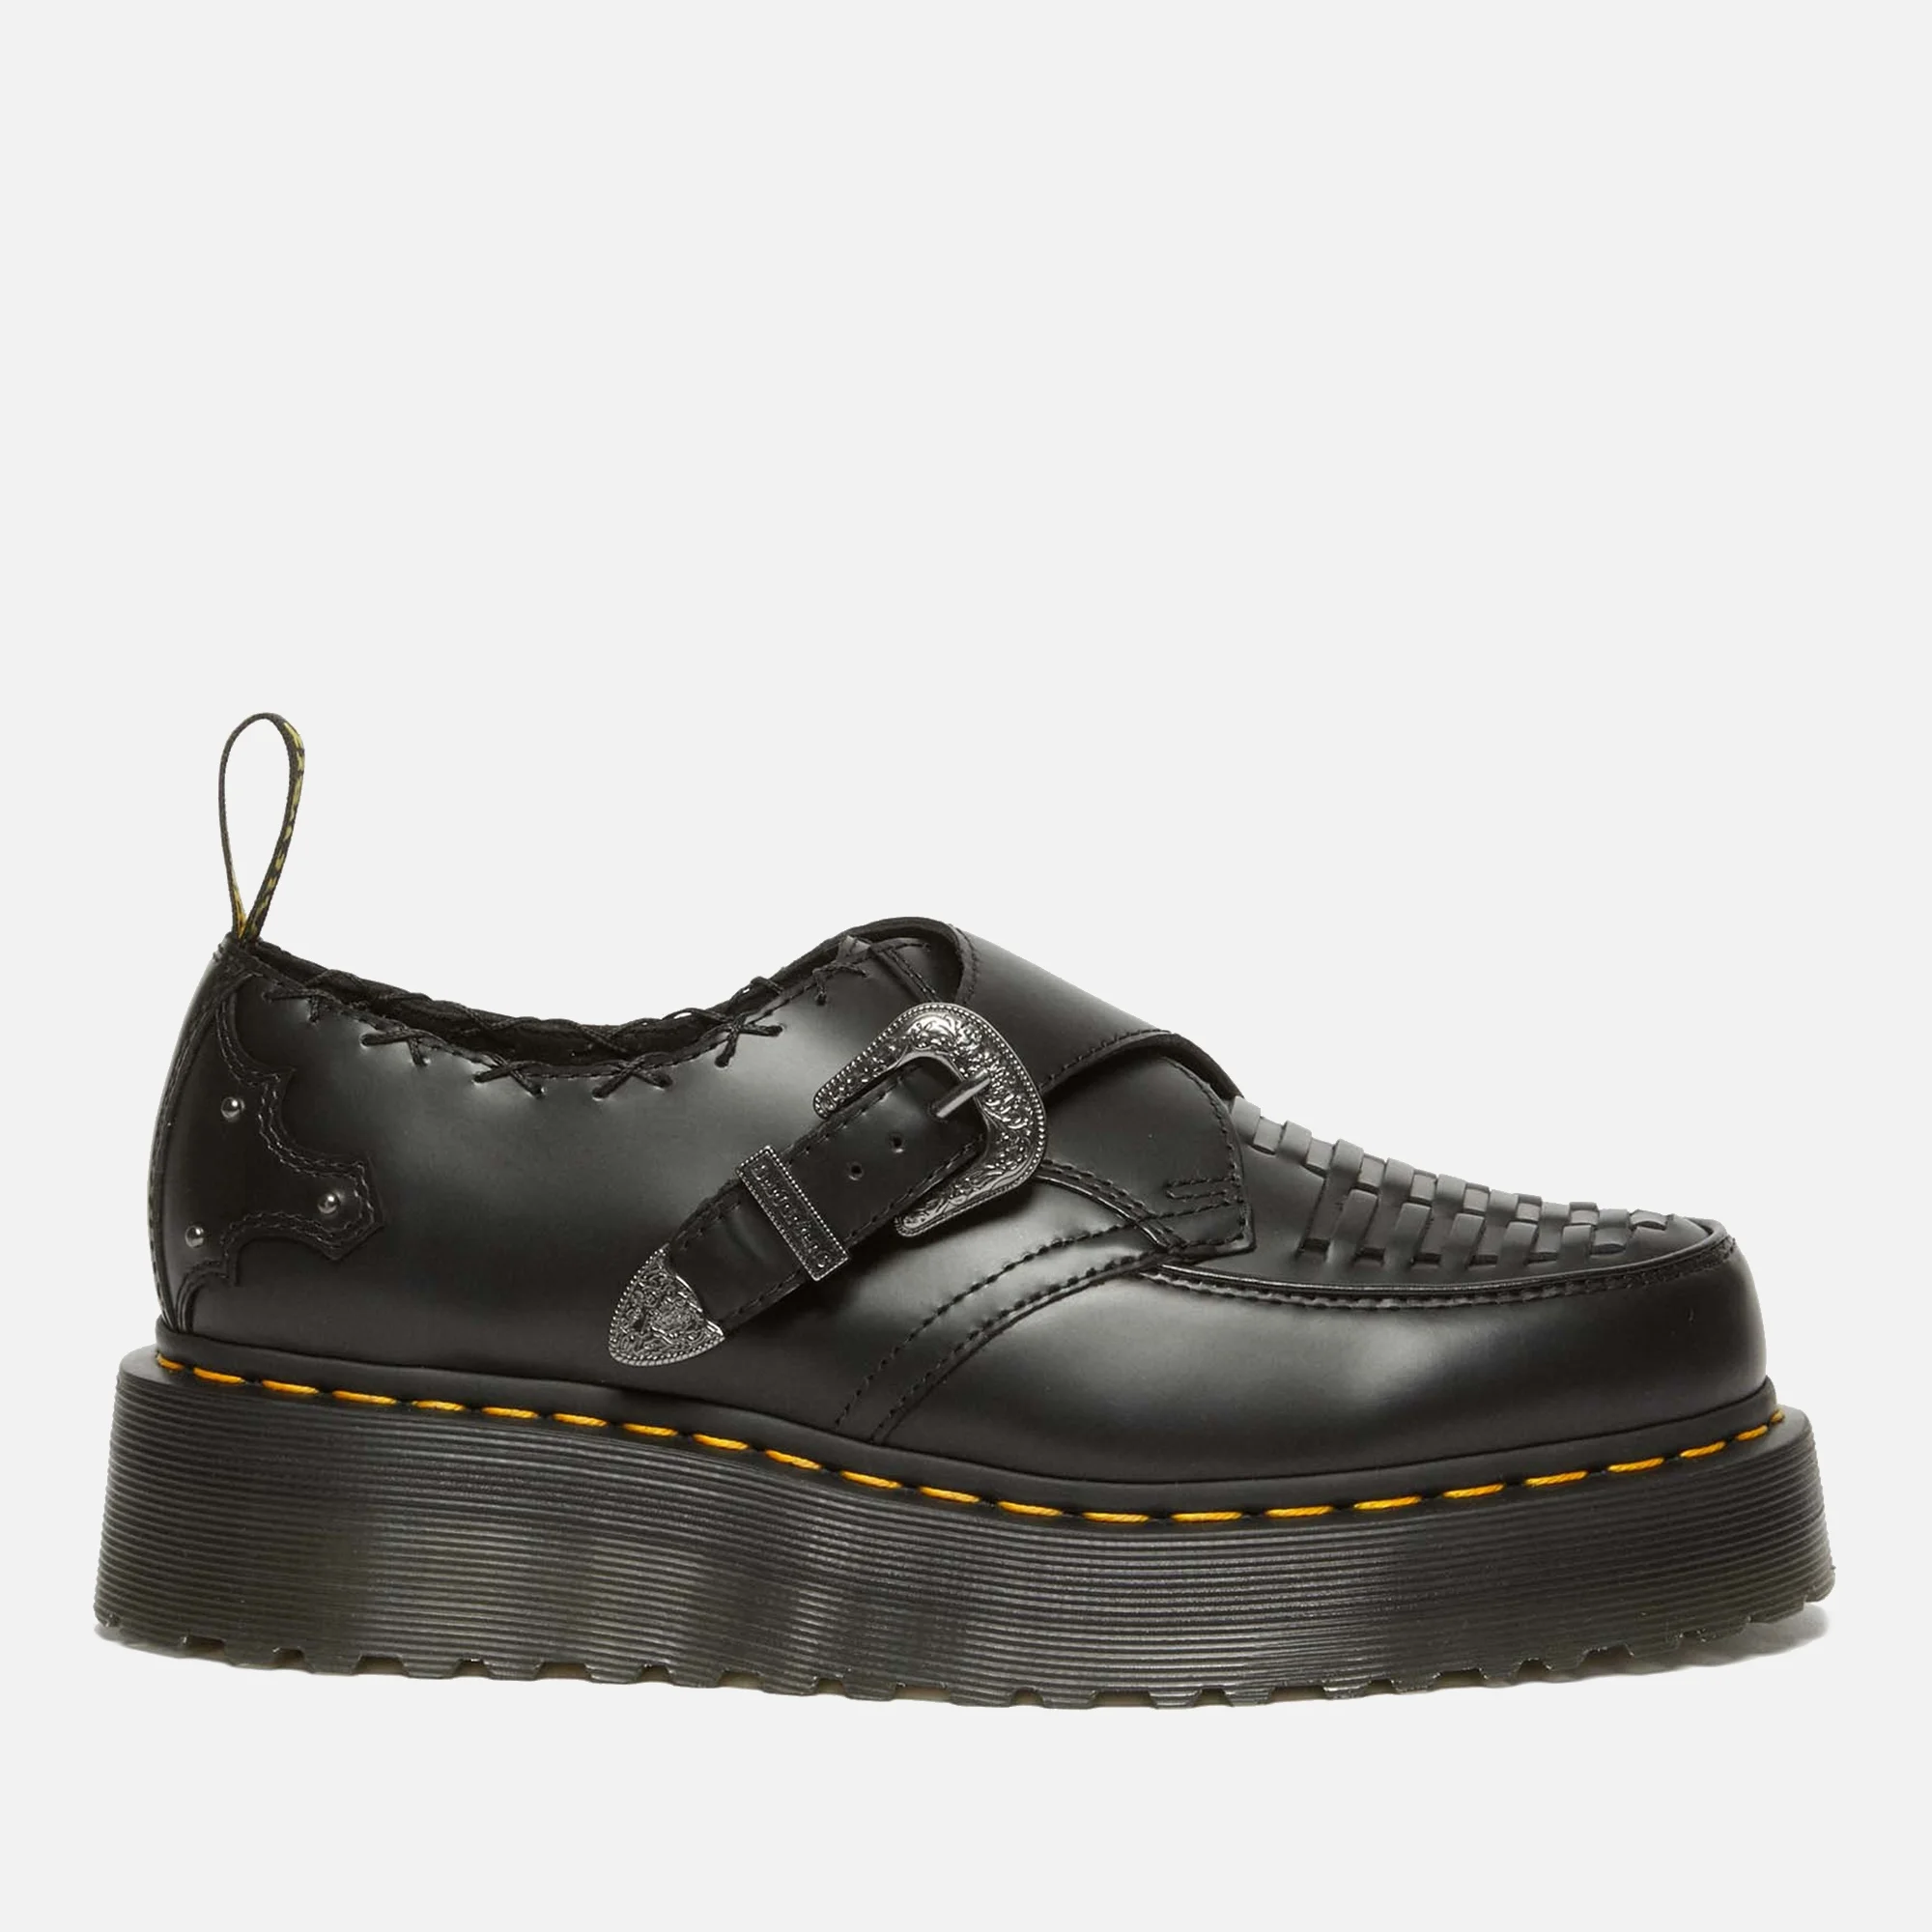 Dr. Martens Ramsey Quad Leather Creepers Image 1